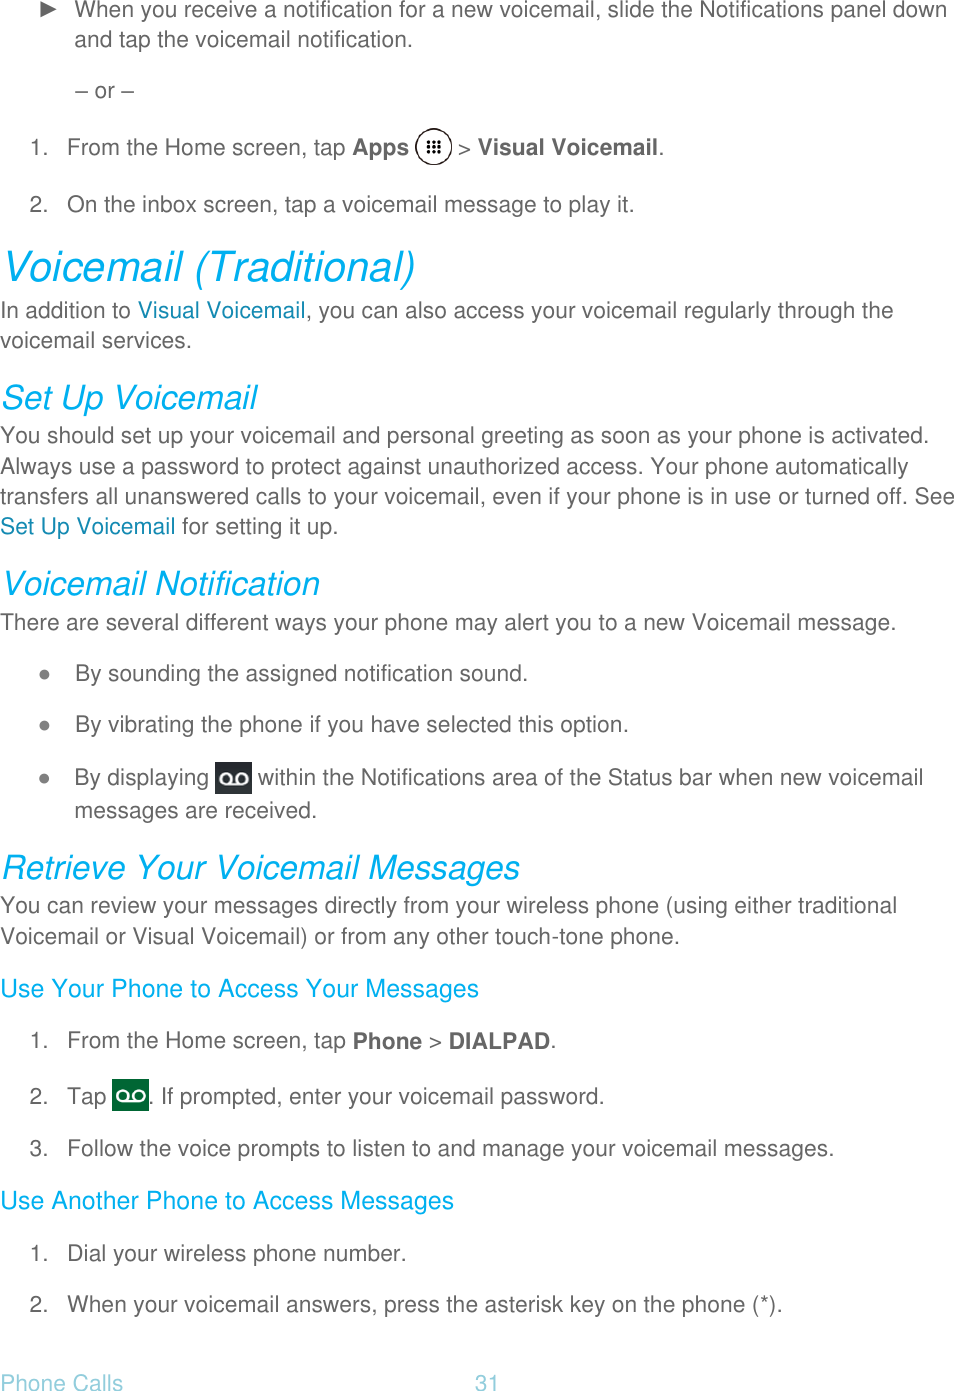 Phone Calls  31   ►  When you receive a notification for a new voicemail, slide the Notifications panel down and tap the voicemail notification. – or – 1.  From the Home screen, tap Apps   &gt; Visual Voicemail.  2.  On the inbox screen, tap a voicemail message to play it. Voicemail (Traditional) In addition to Visual Voicemail, you can also access your voicemail regularly through the voicemail services. Set Up Voicemail You should set up your voicemail and personal greeting as soon as your phone is activated. Always use a password to protect against unauthorized access. Your phone automatically transfers all unanswered calls to your voicemail, even if your phone is in use or turned off. See Set Up Voicemail for setting it up. Voicemail Notification There are several different ways your phone may alert you to a new Voicemail message. ● By sounding the assigned notification sound. ● By vibrating the phone if you have selected this option. ● By displaying   within the Notifications area of the Status bar when new voicemail messages are received. Retrieve Your Voicemail Messages You can review your messages directly from your wireless phone (using either traditional Voicemail or Visual Voicemail) or from any other touch-tone phone. Use Your Phone to Access Your Messages 1.  From the Home screen, tap Phone &gt; DIALPAD. 2. Tap  . If prompted, enter your voicemail password. 3.  Follow the voice prompts to listen to and manage your voicemail messages. Use Another Phone to Access Messages 1.  Dial your wireless phone number. 2.  When your voicemail answers, press the asterisk key on the phone (*). 